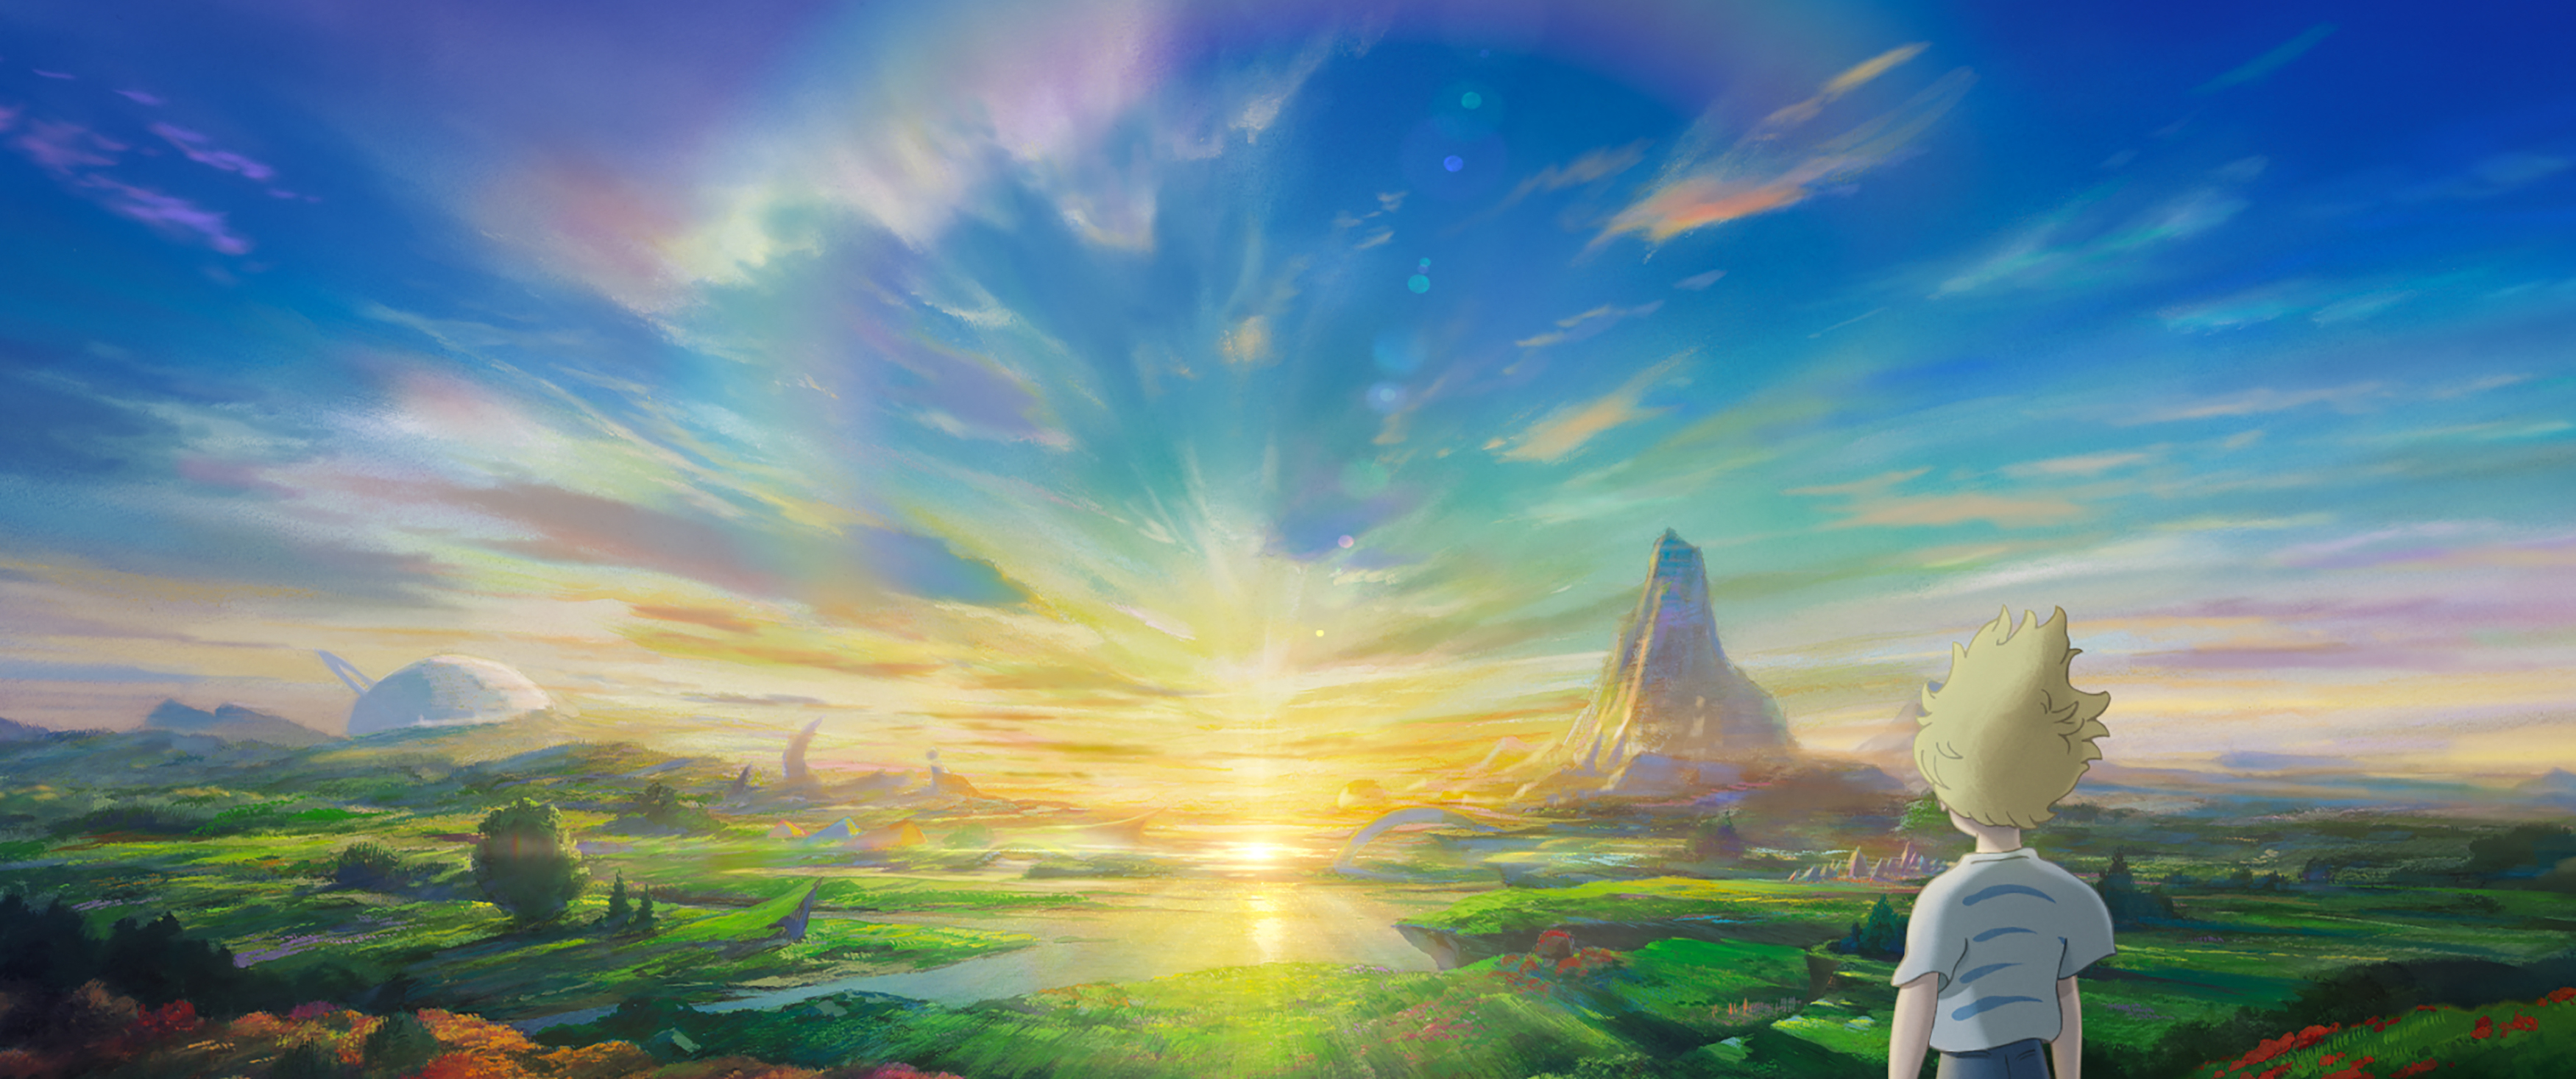 A tousle-haired blonde boy stands with his back to the camera in front of a gloriously bright and colorful sunrise (or sunset?) in a promotional image for Studio Ponoc’s animated movie The Imaginary